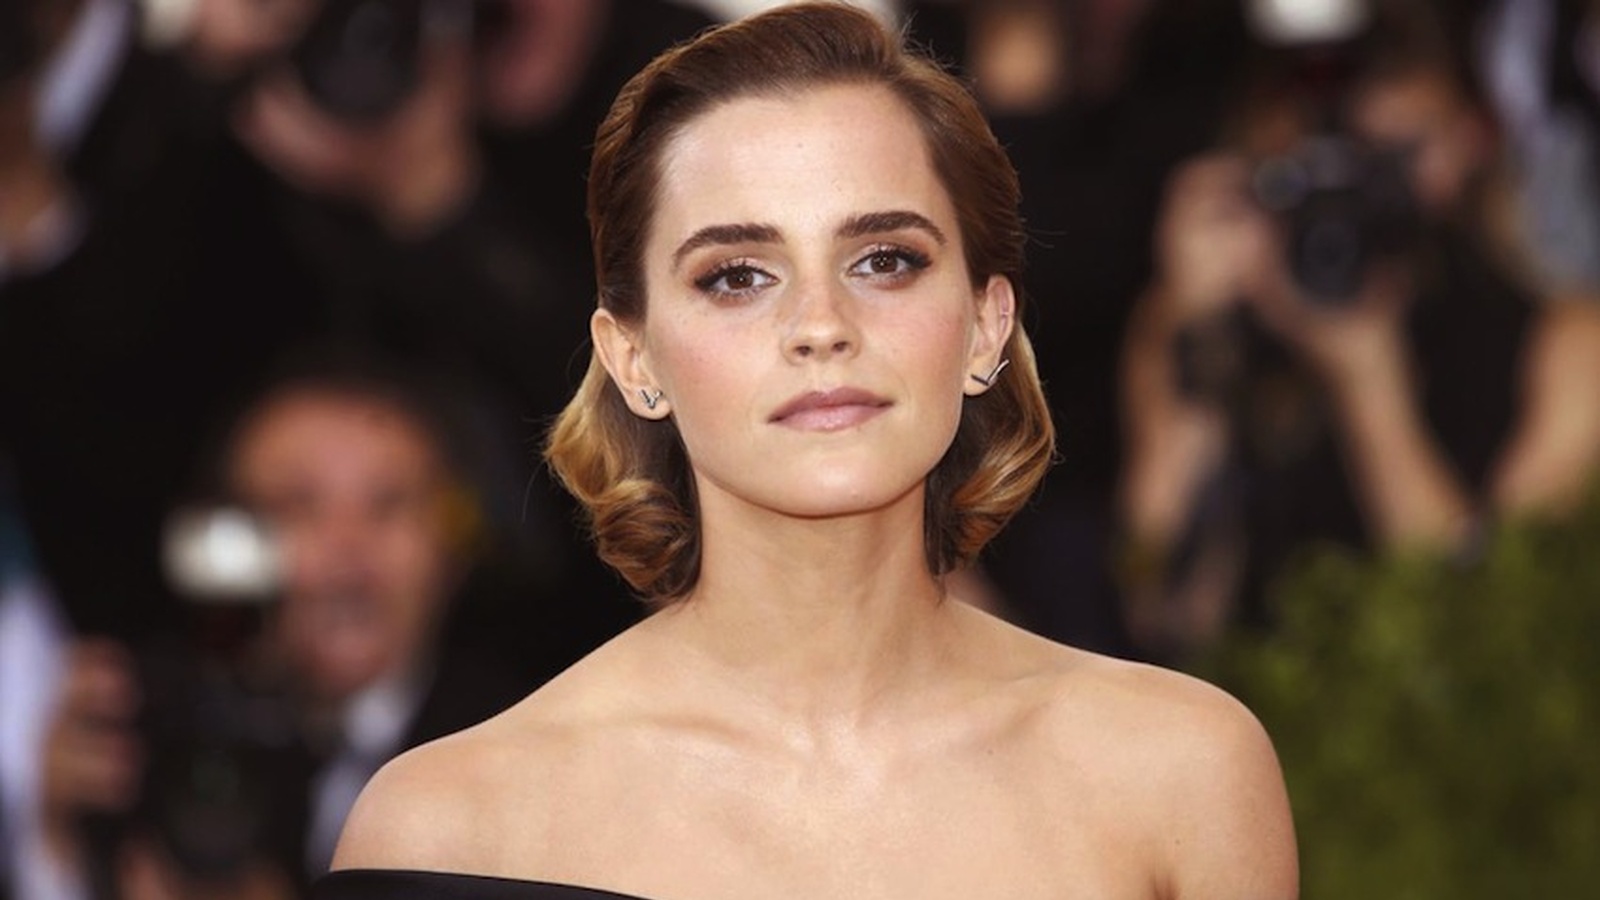  Emma Watson's Met Gala Dress Was Made Out Of Plastic Bottles